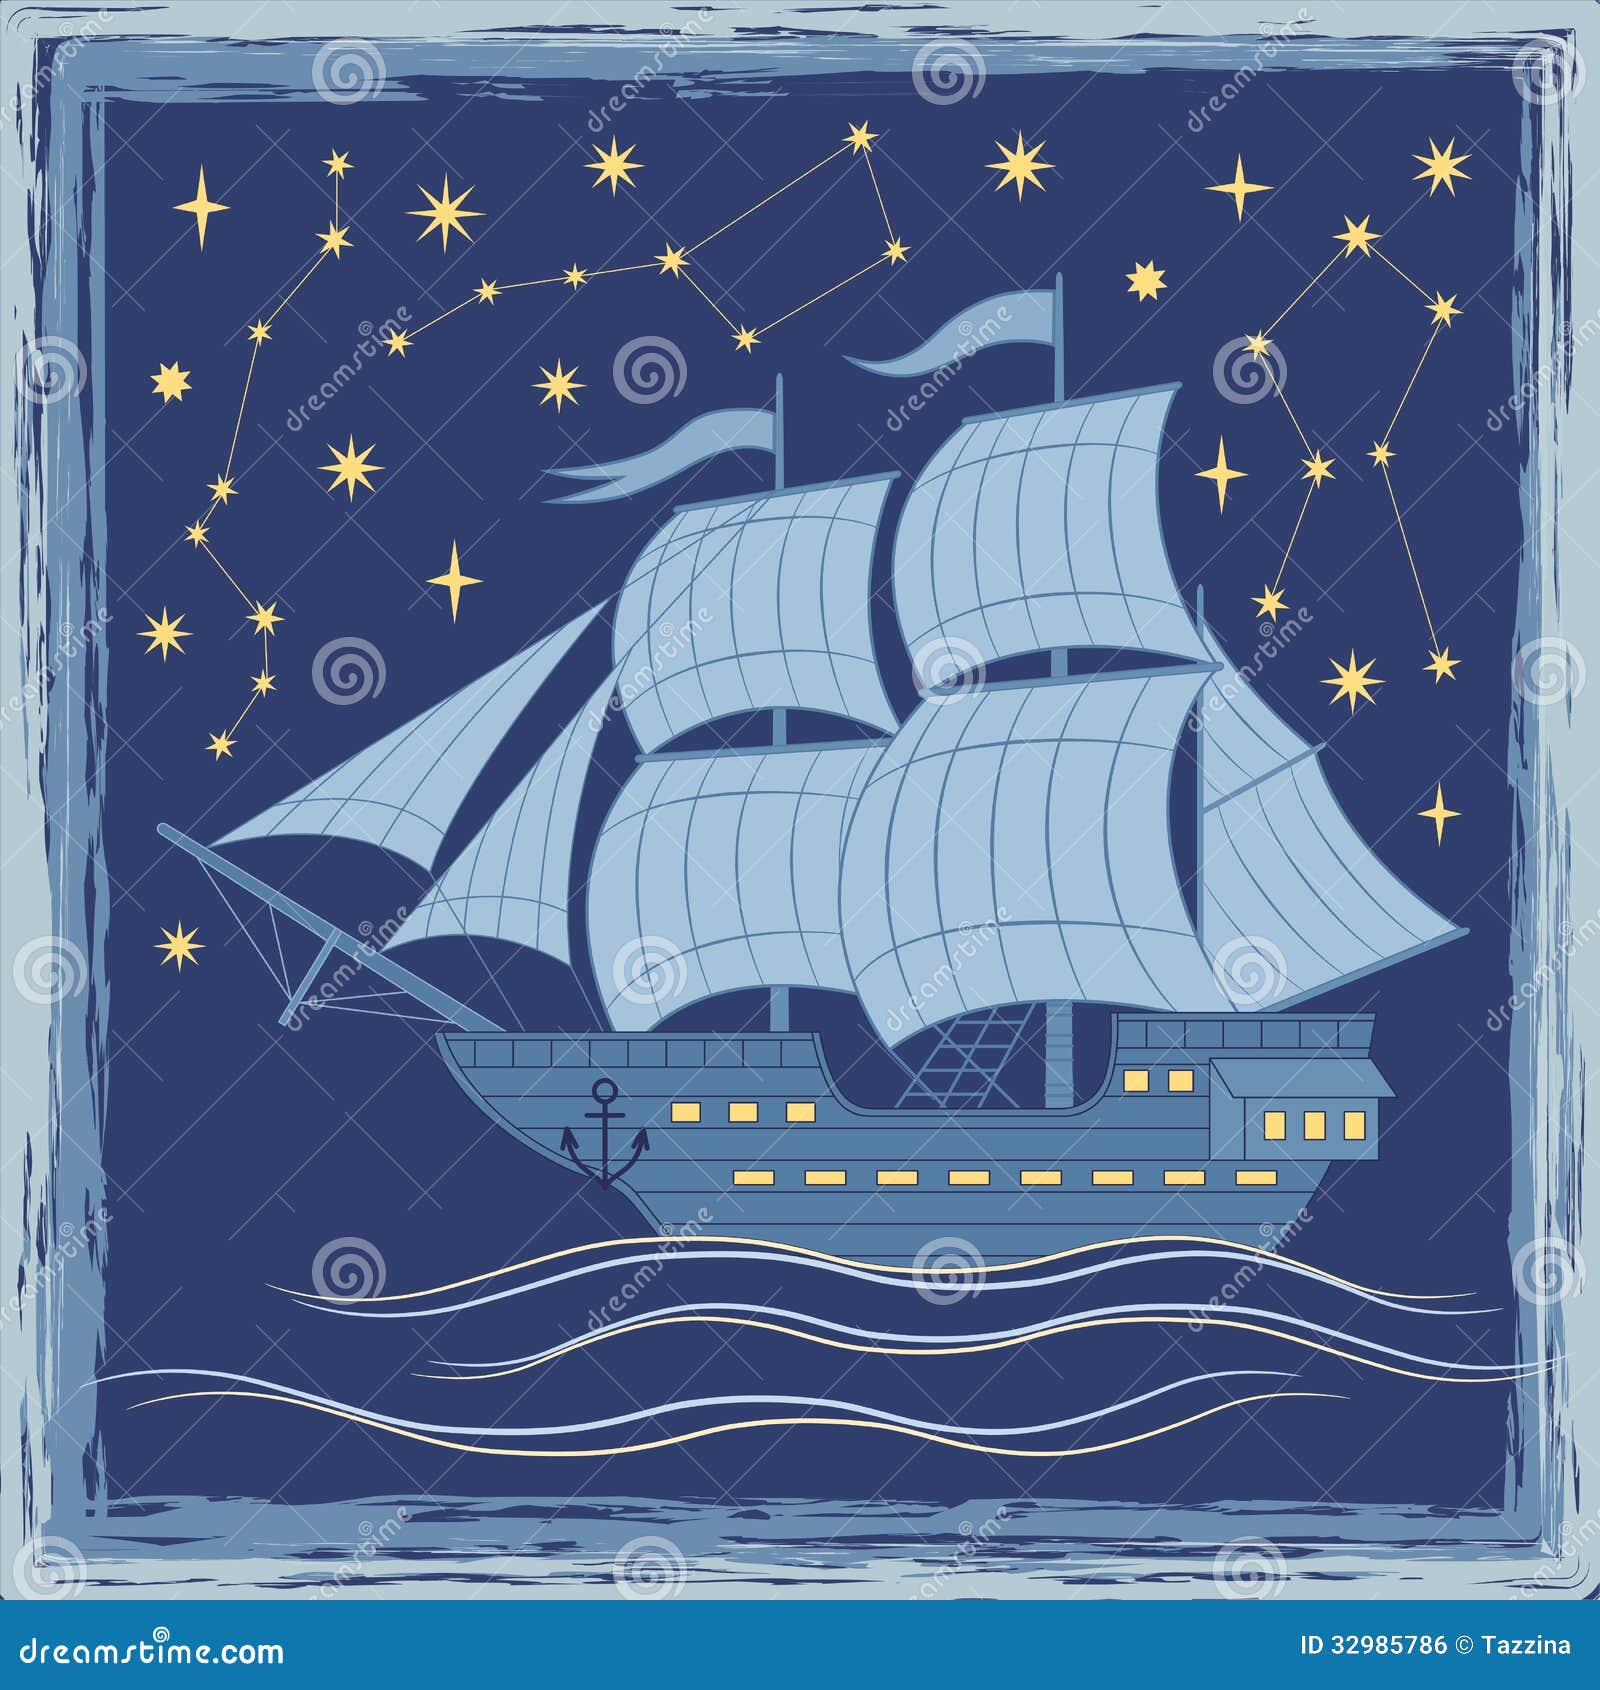 ... sailboat can be used for graphic design, textile design or web design